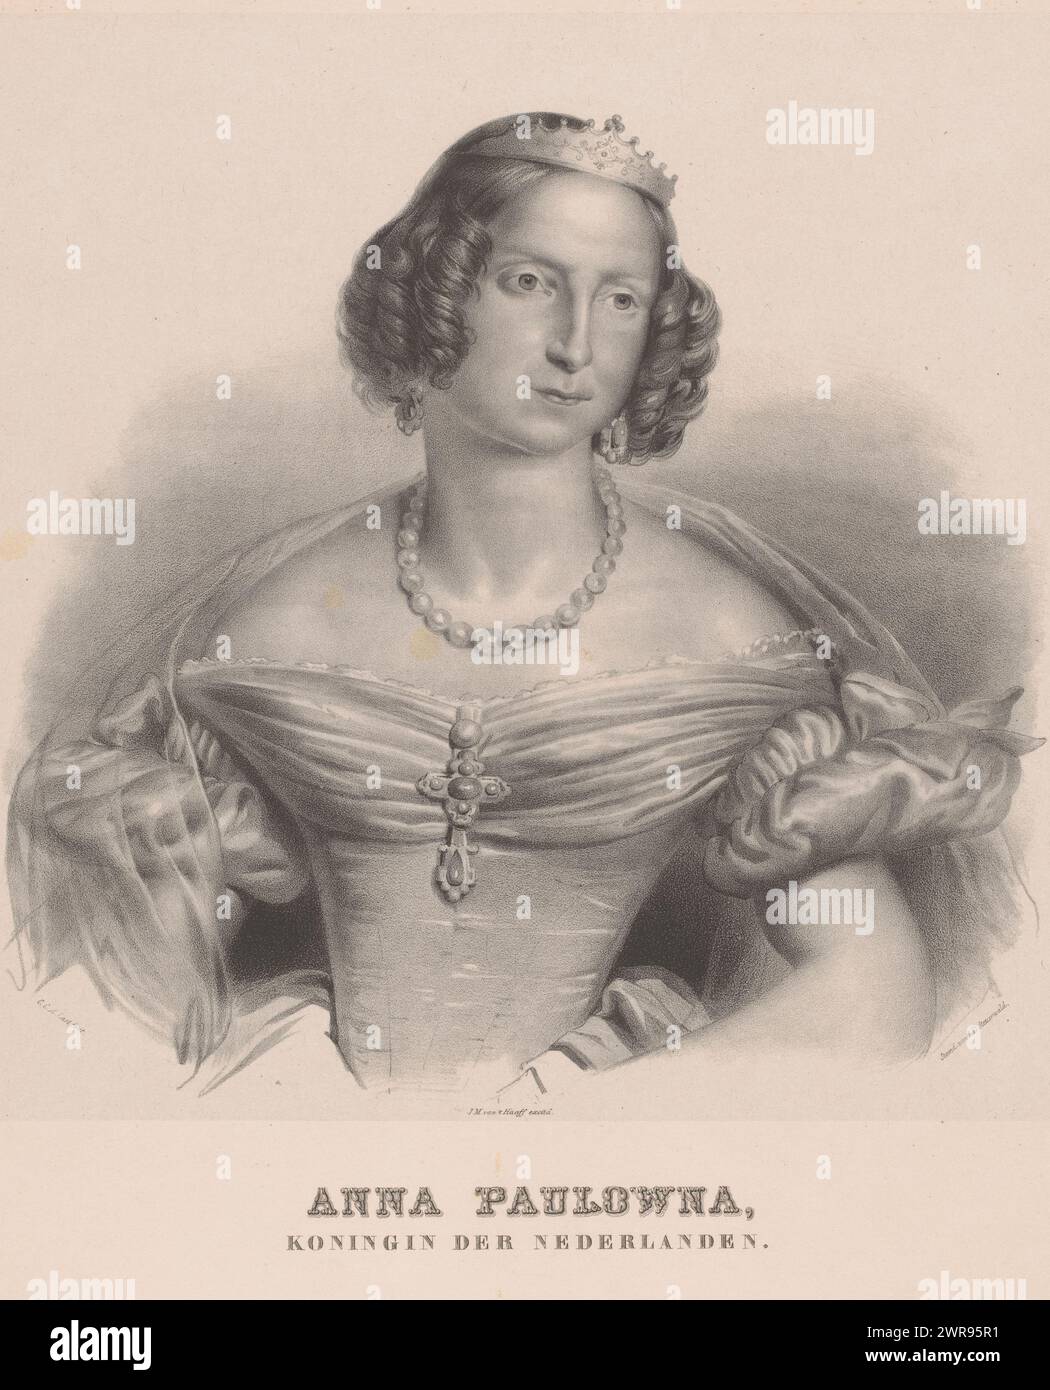 Portrait of Anna Paulowna, Anna Paulowna, Queen of the Netherlands (title on object), The sitter wears a dress with bare shoulders, a pearl necklace, earrings and a tiara., print maker: Carel Christiaan Antony Last, printer: Jan Dam Steuerwald, publisher: J.M. van 't Haaff, print maker: Netherlands, publisher: The Hague, 1822 - 1863, paper, height 440 mm × width 350 mm, print Stock Photo